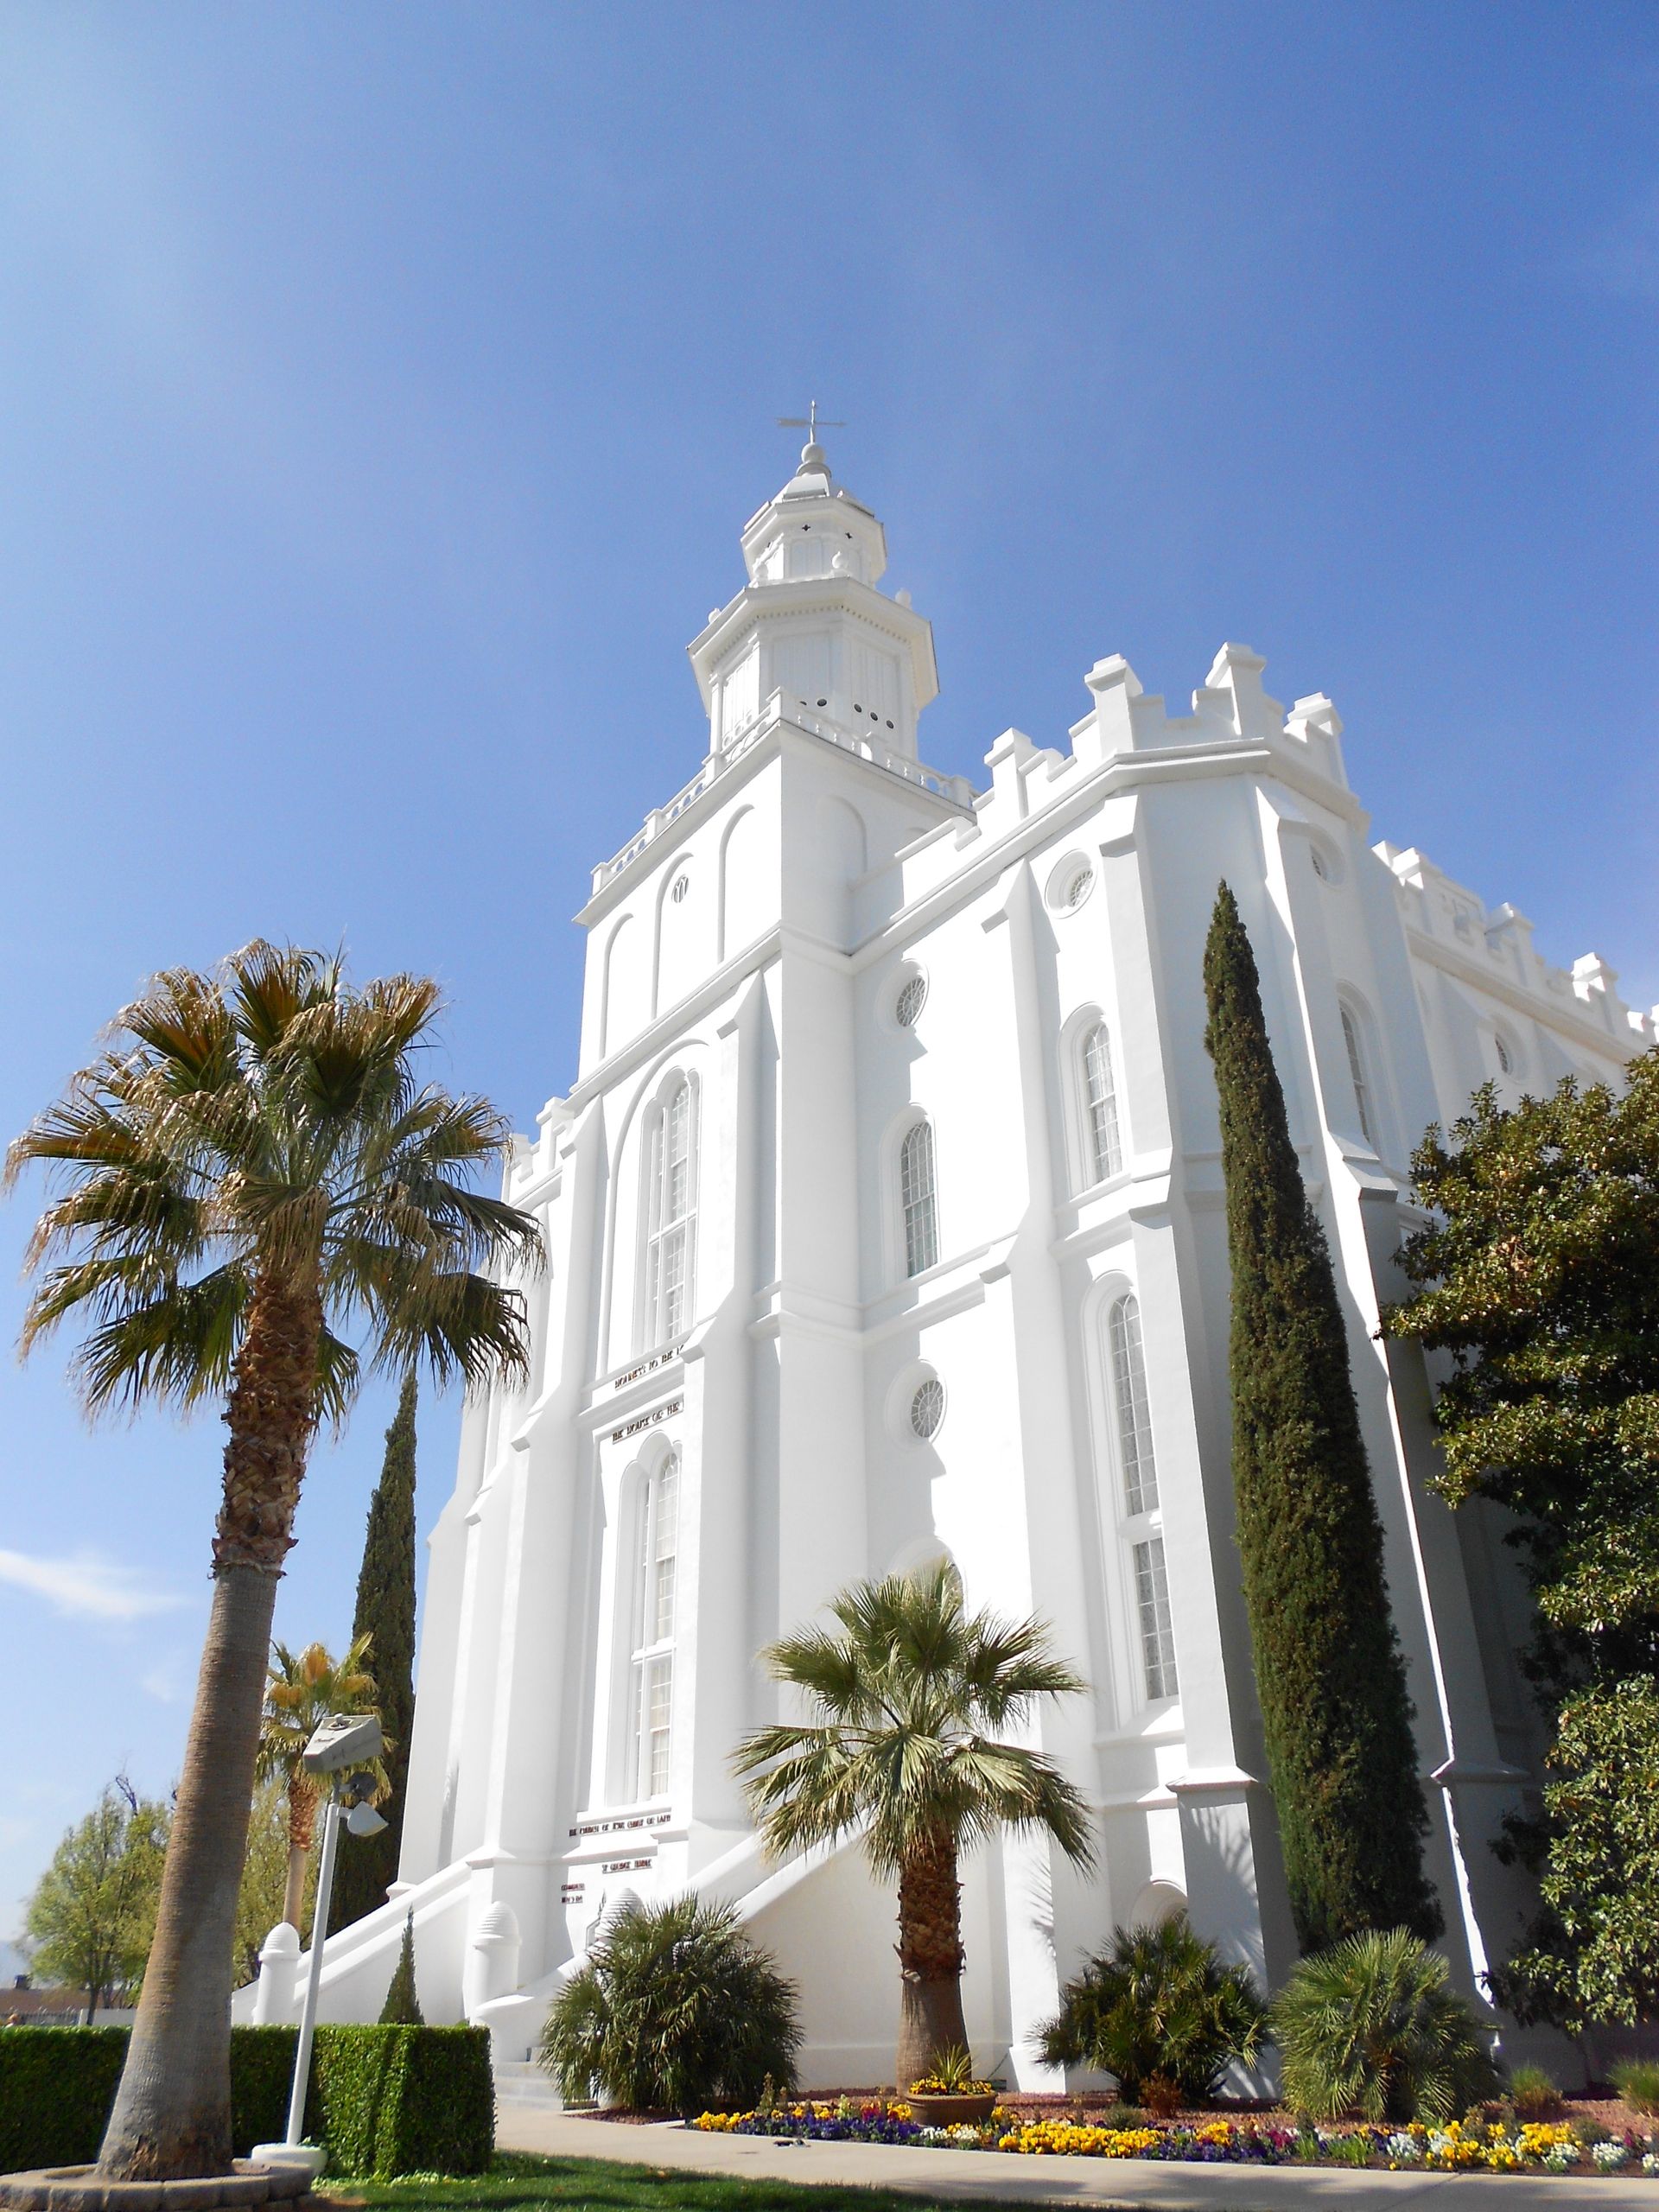 The St. George Utah Temple, including scenery.